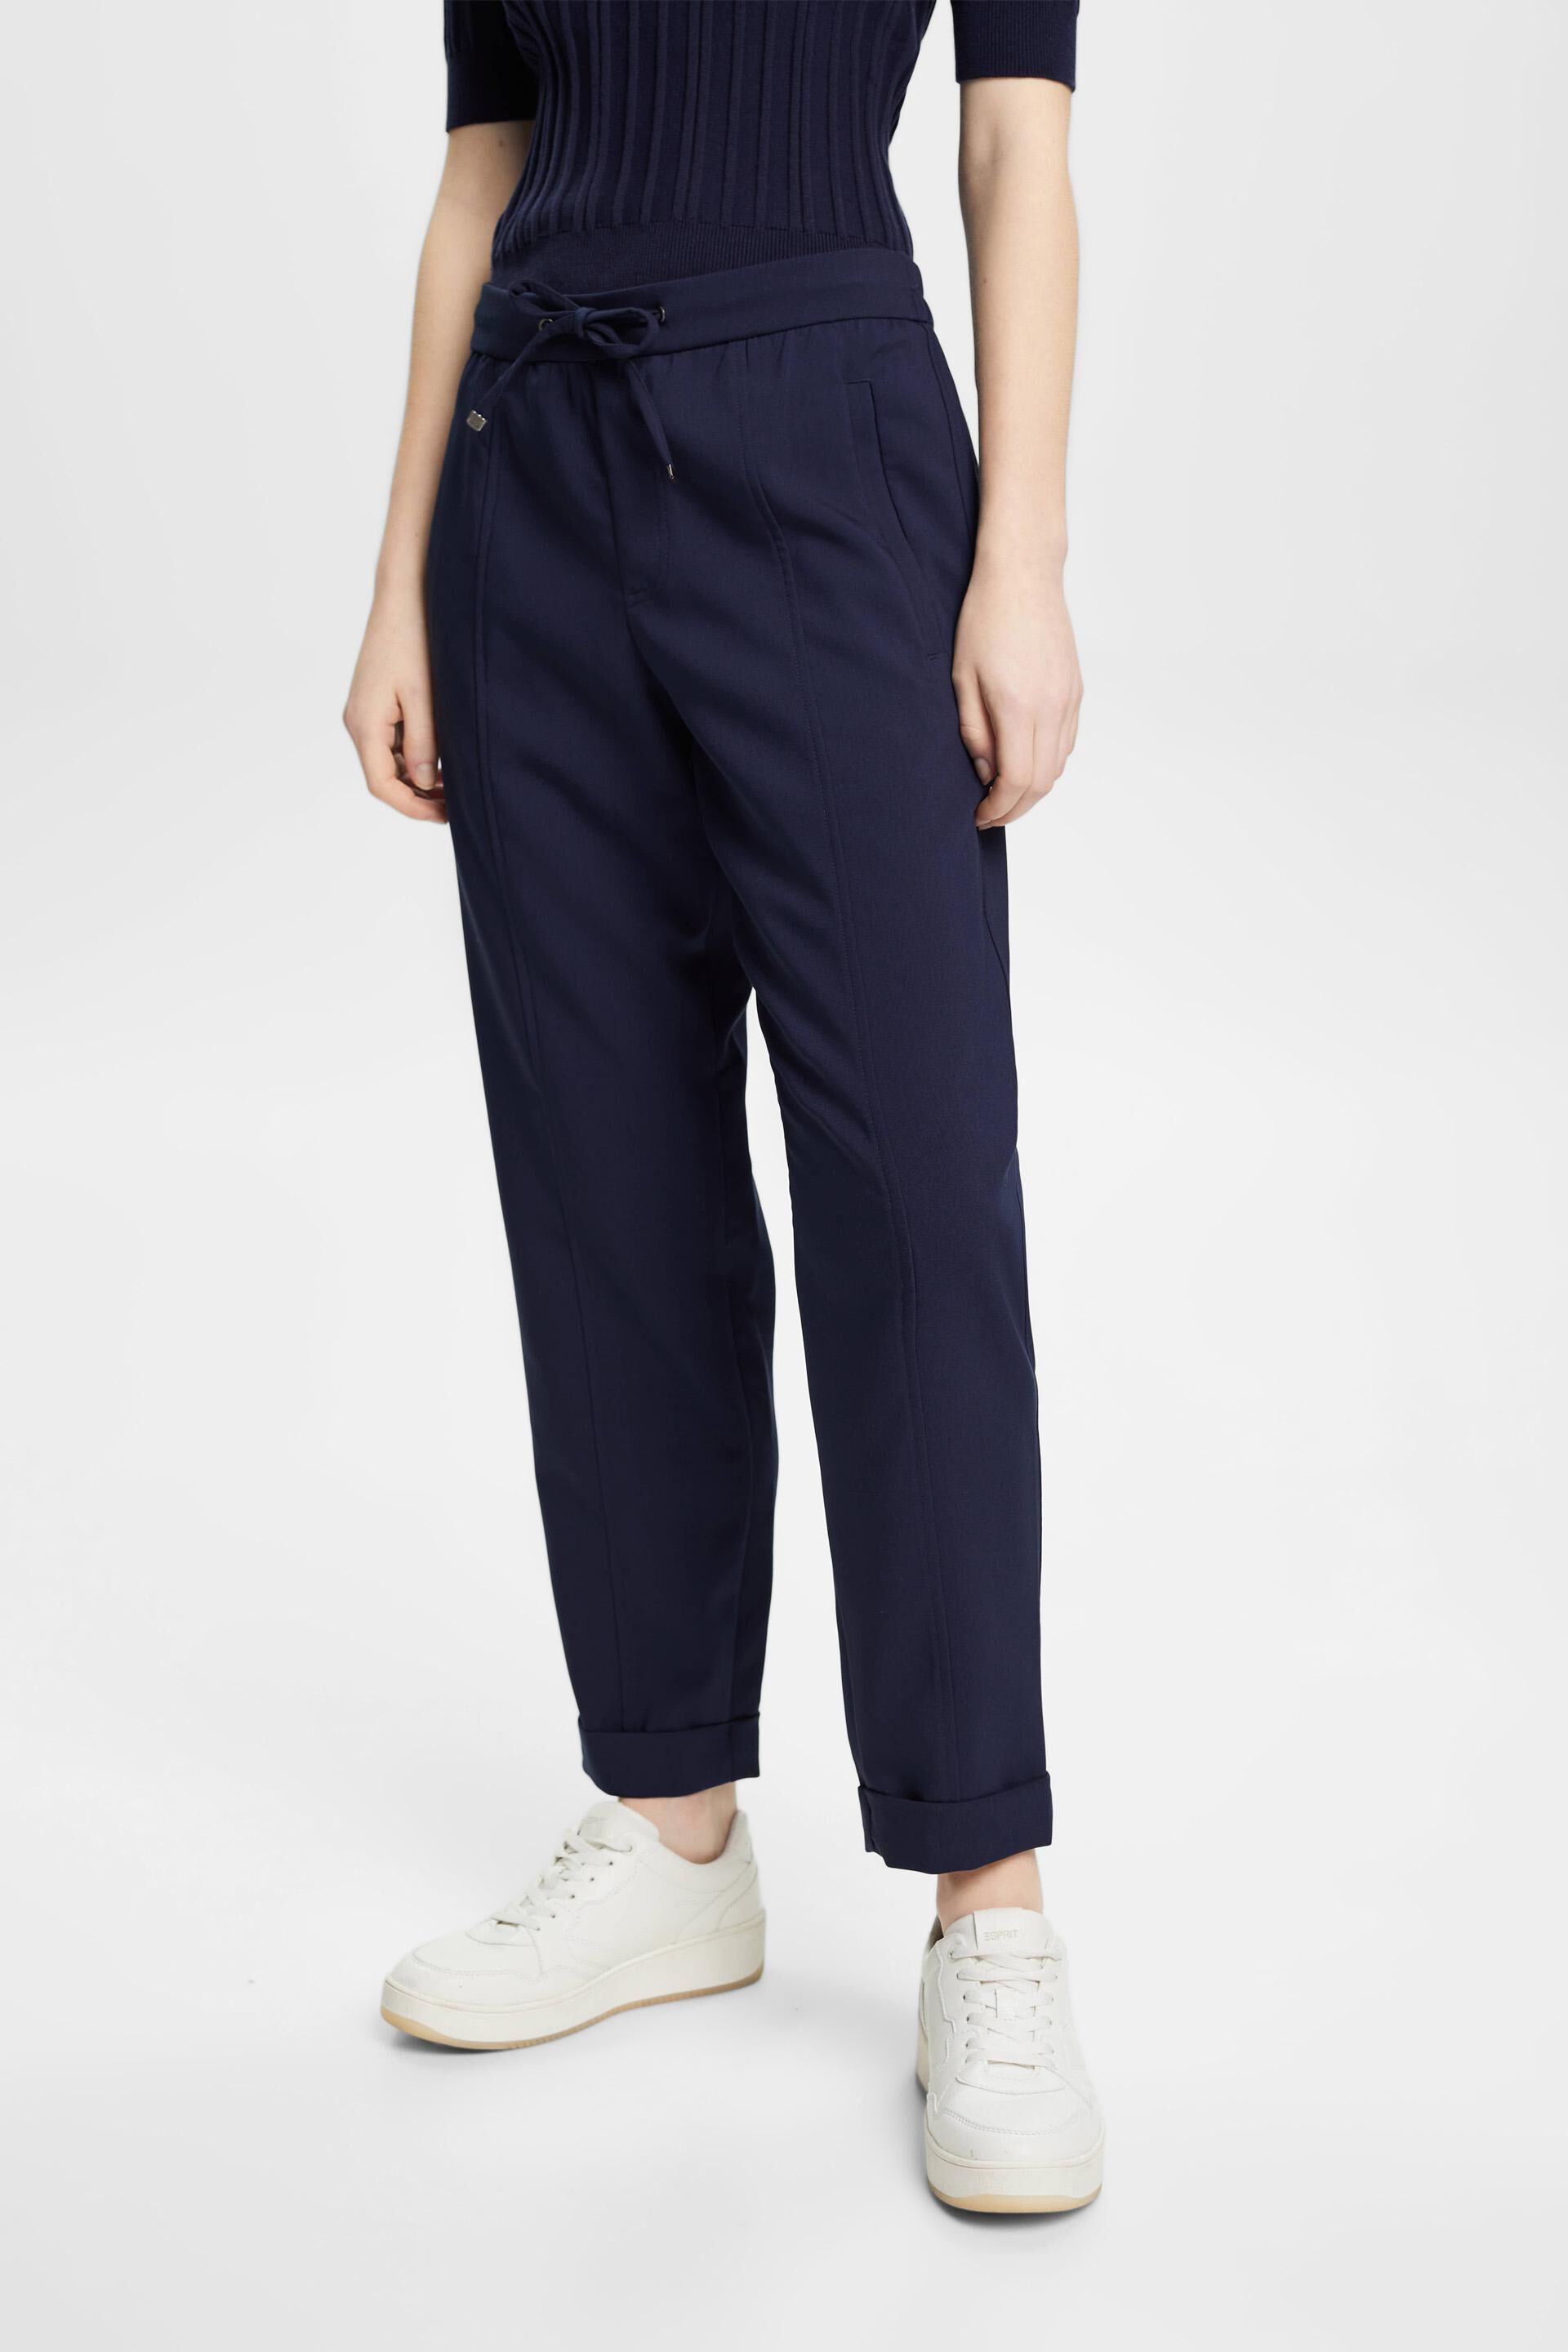 Esprit trousers Jogger style